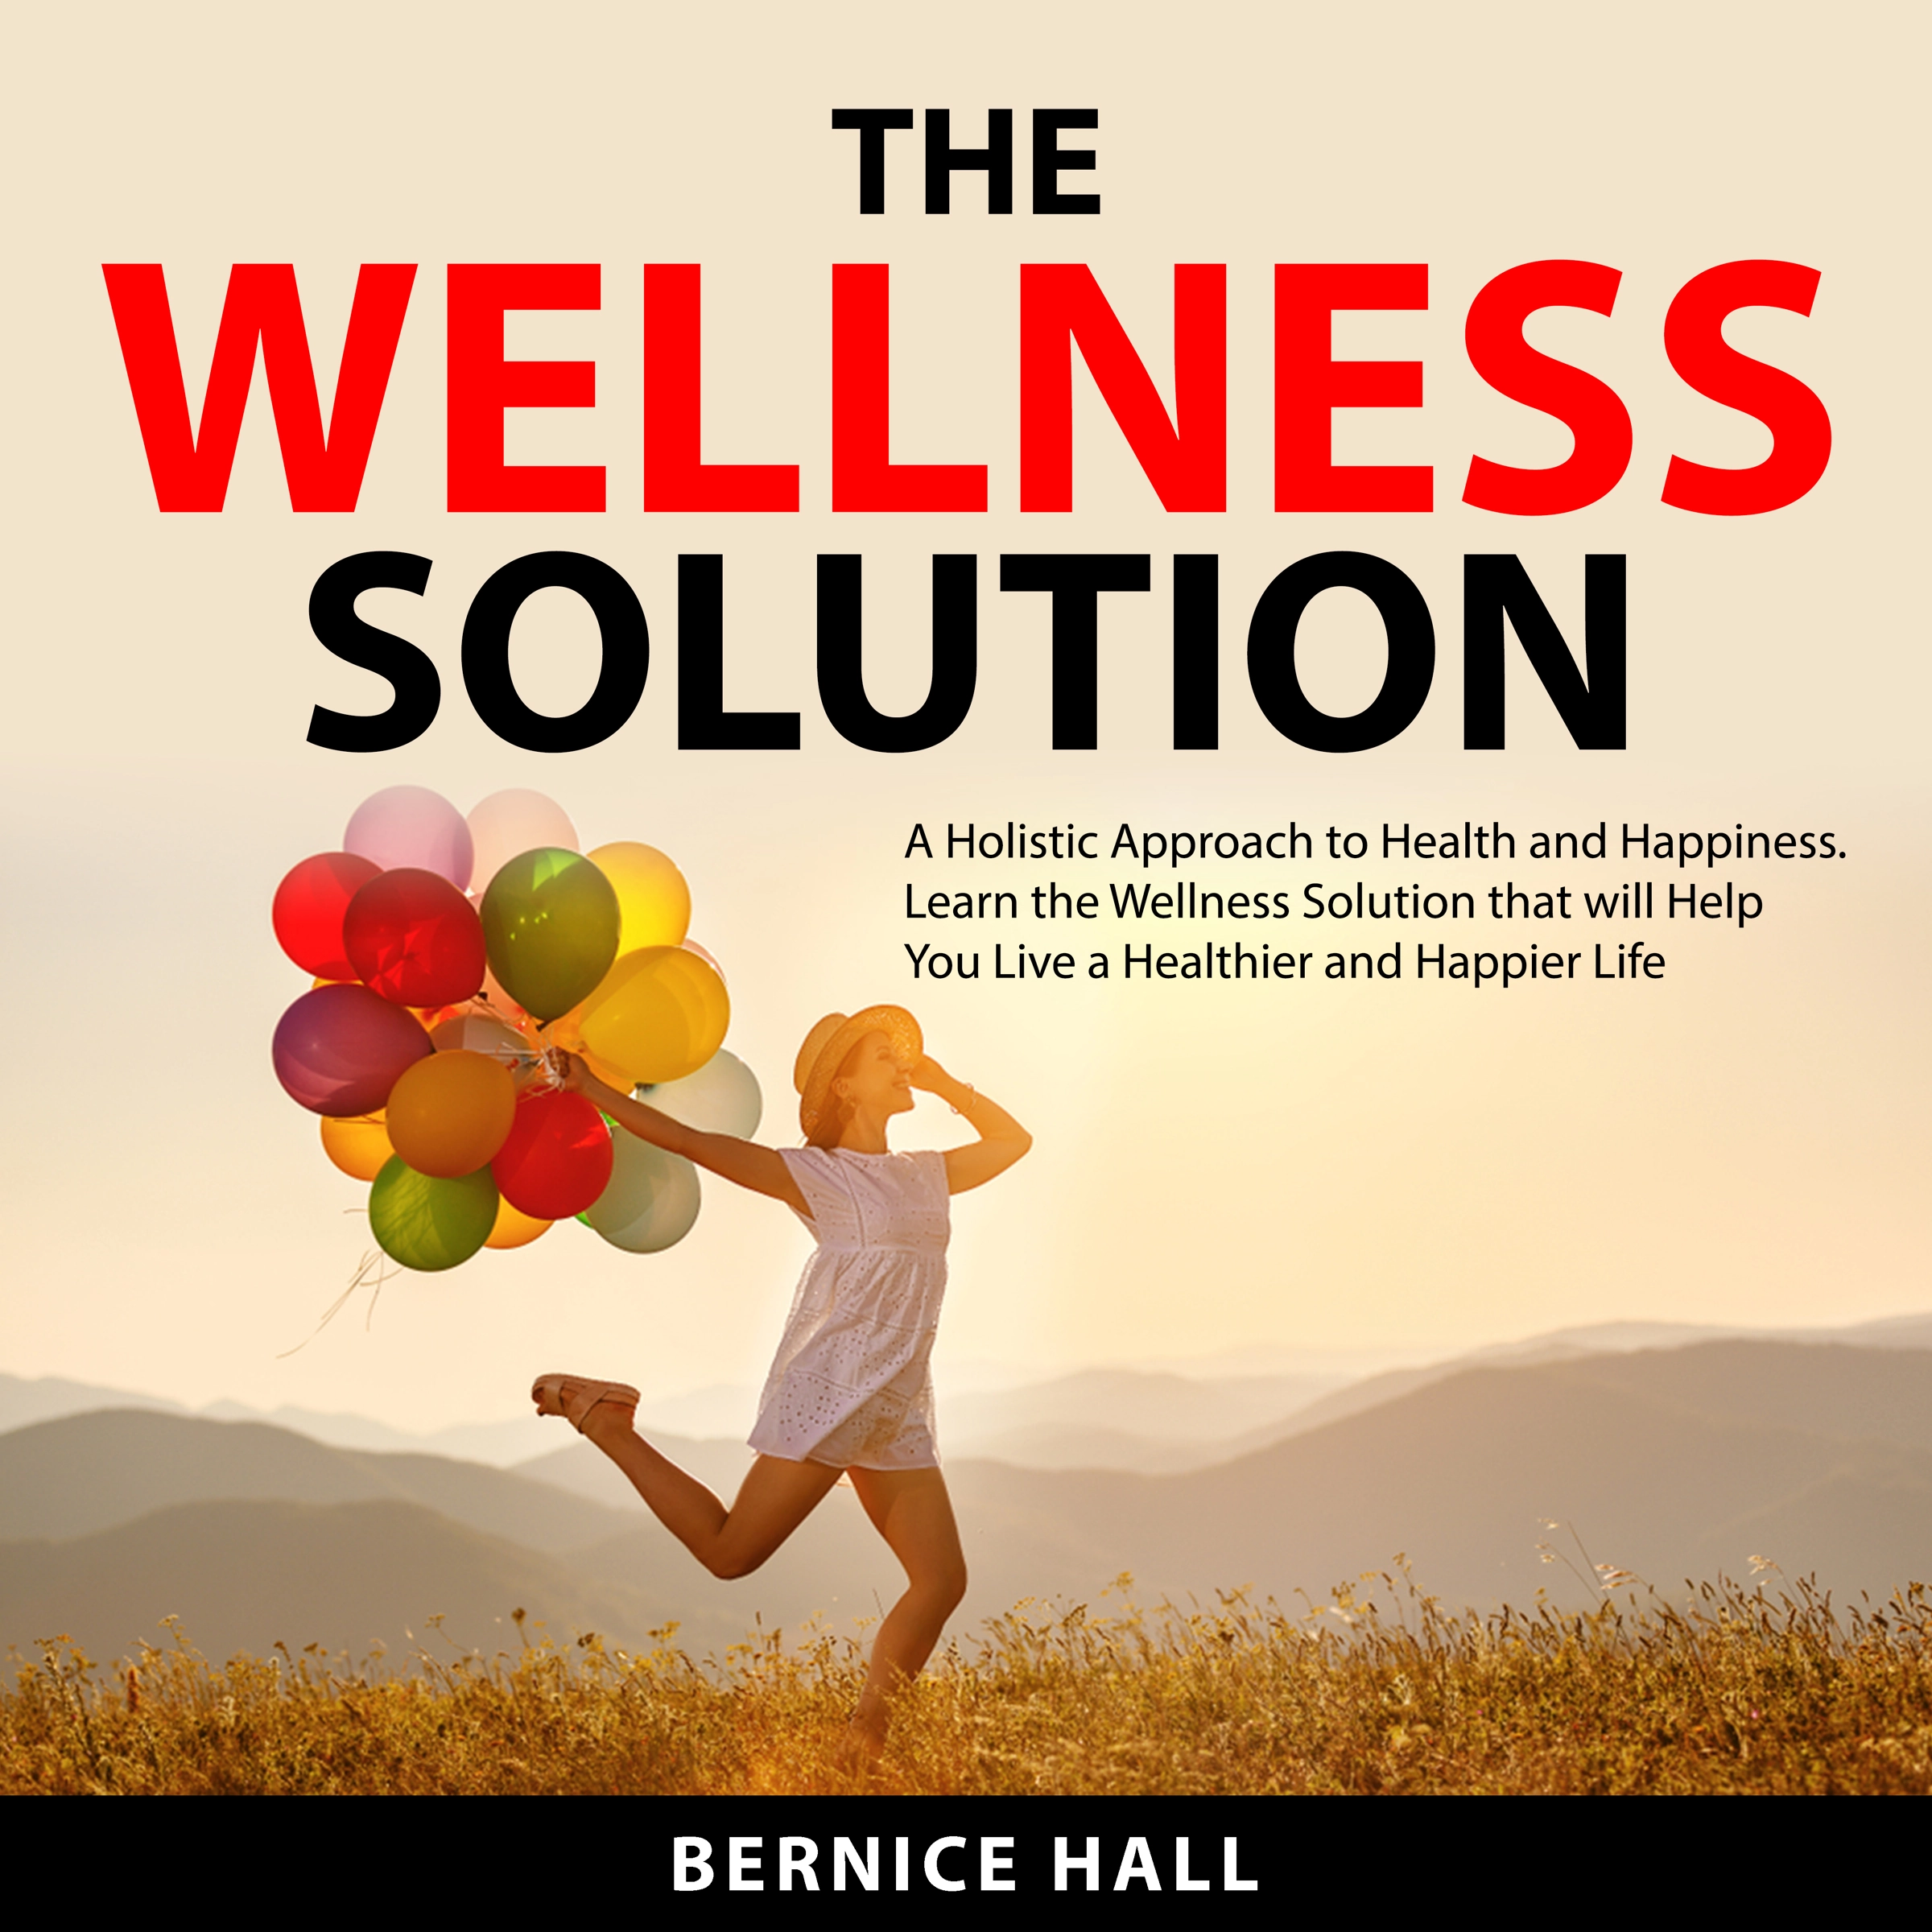 The Wellness Solution Audiobook by Bernice Hall